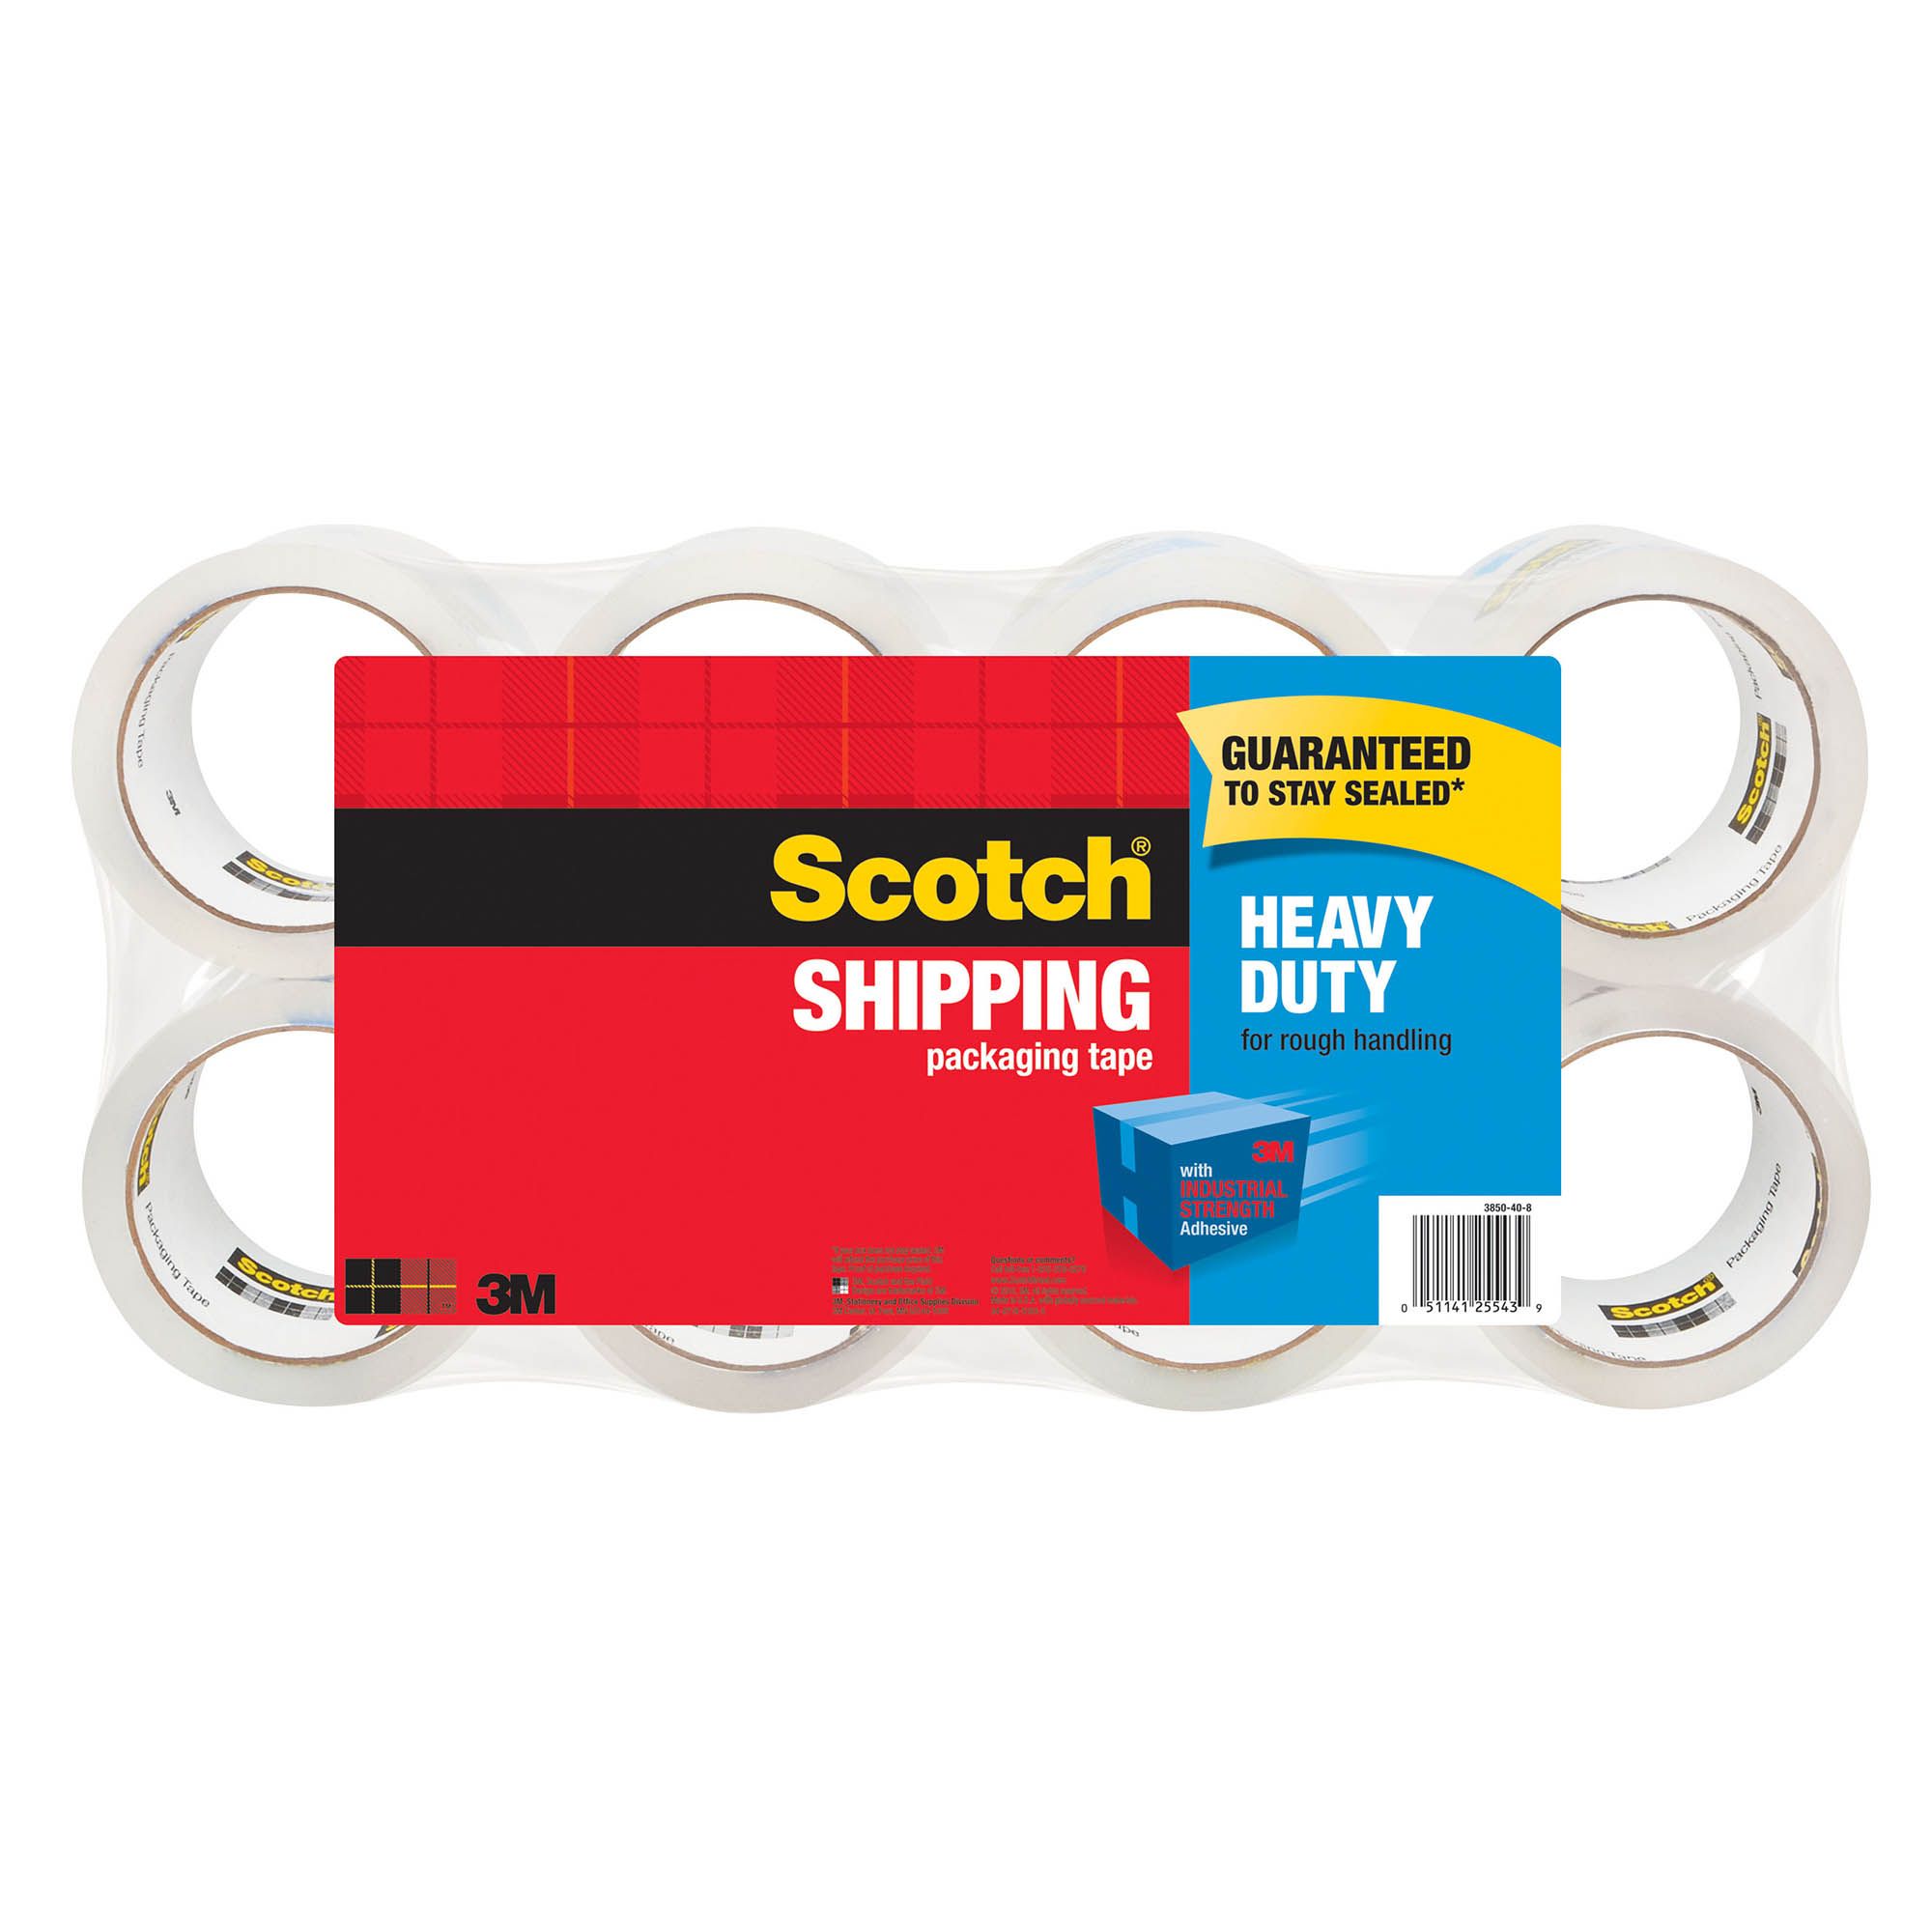 Scotch Heavy-Duty Shipping Packaging Tape, 1 8/9&quot; x 1,573 1/5&quot;, 8 pk. - Clear